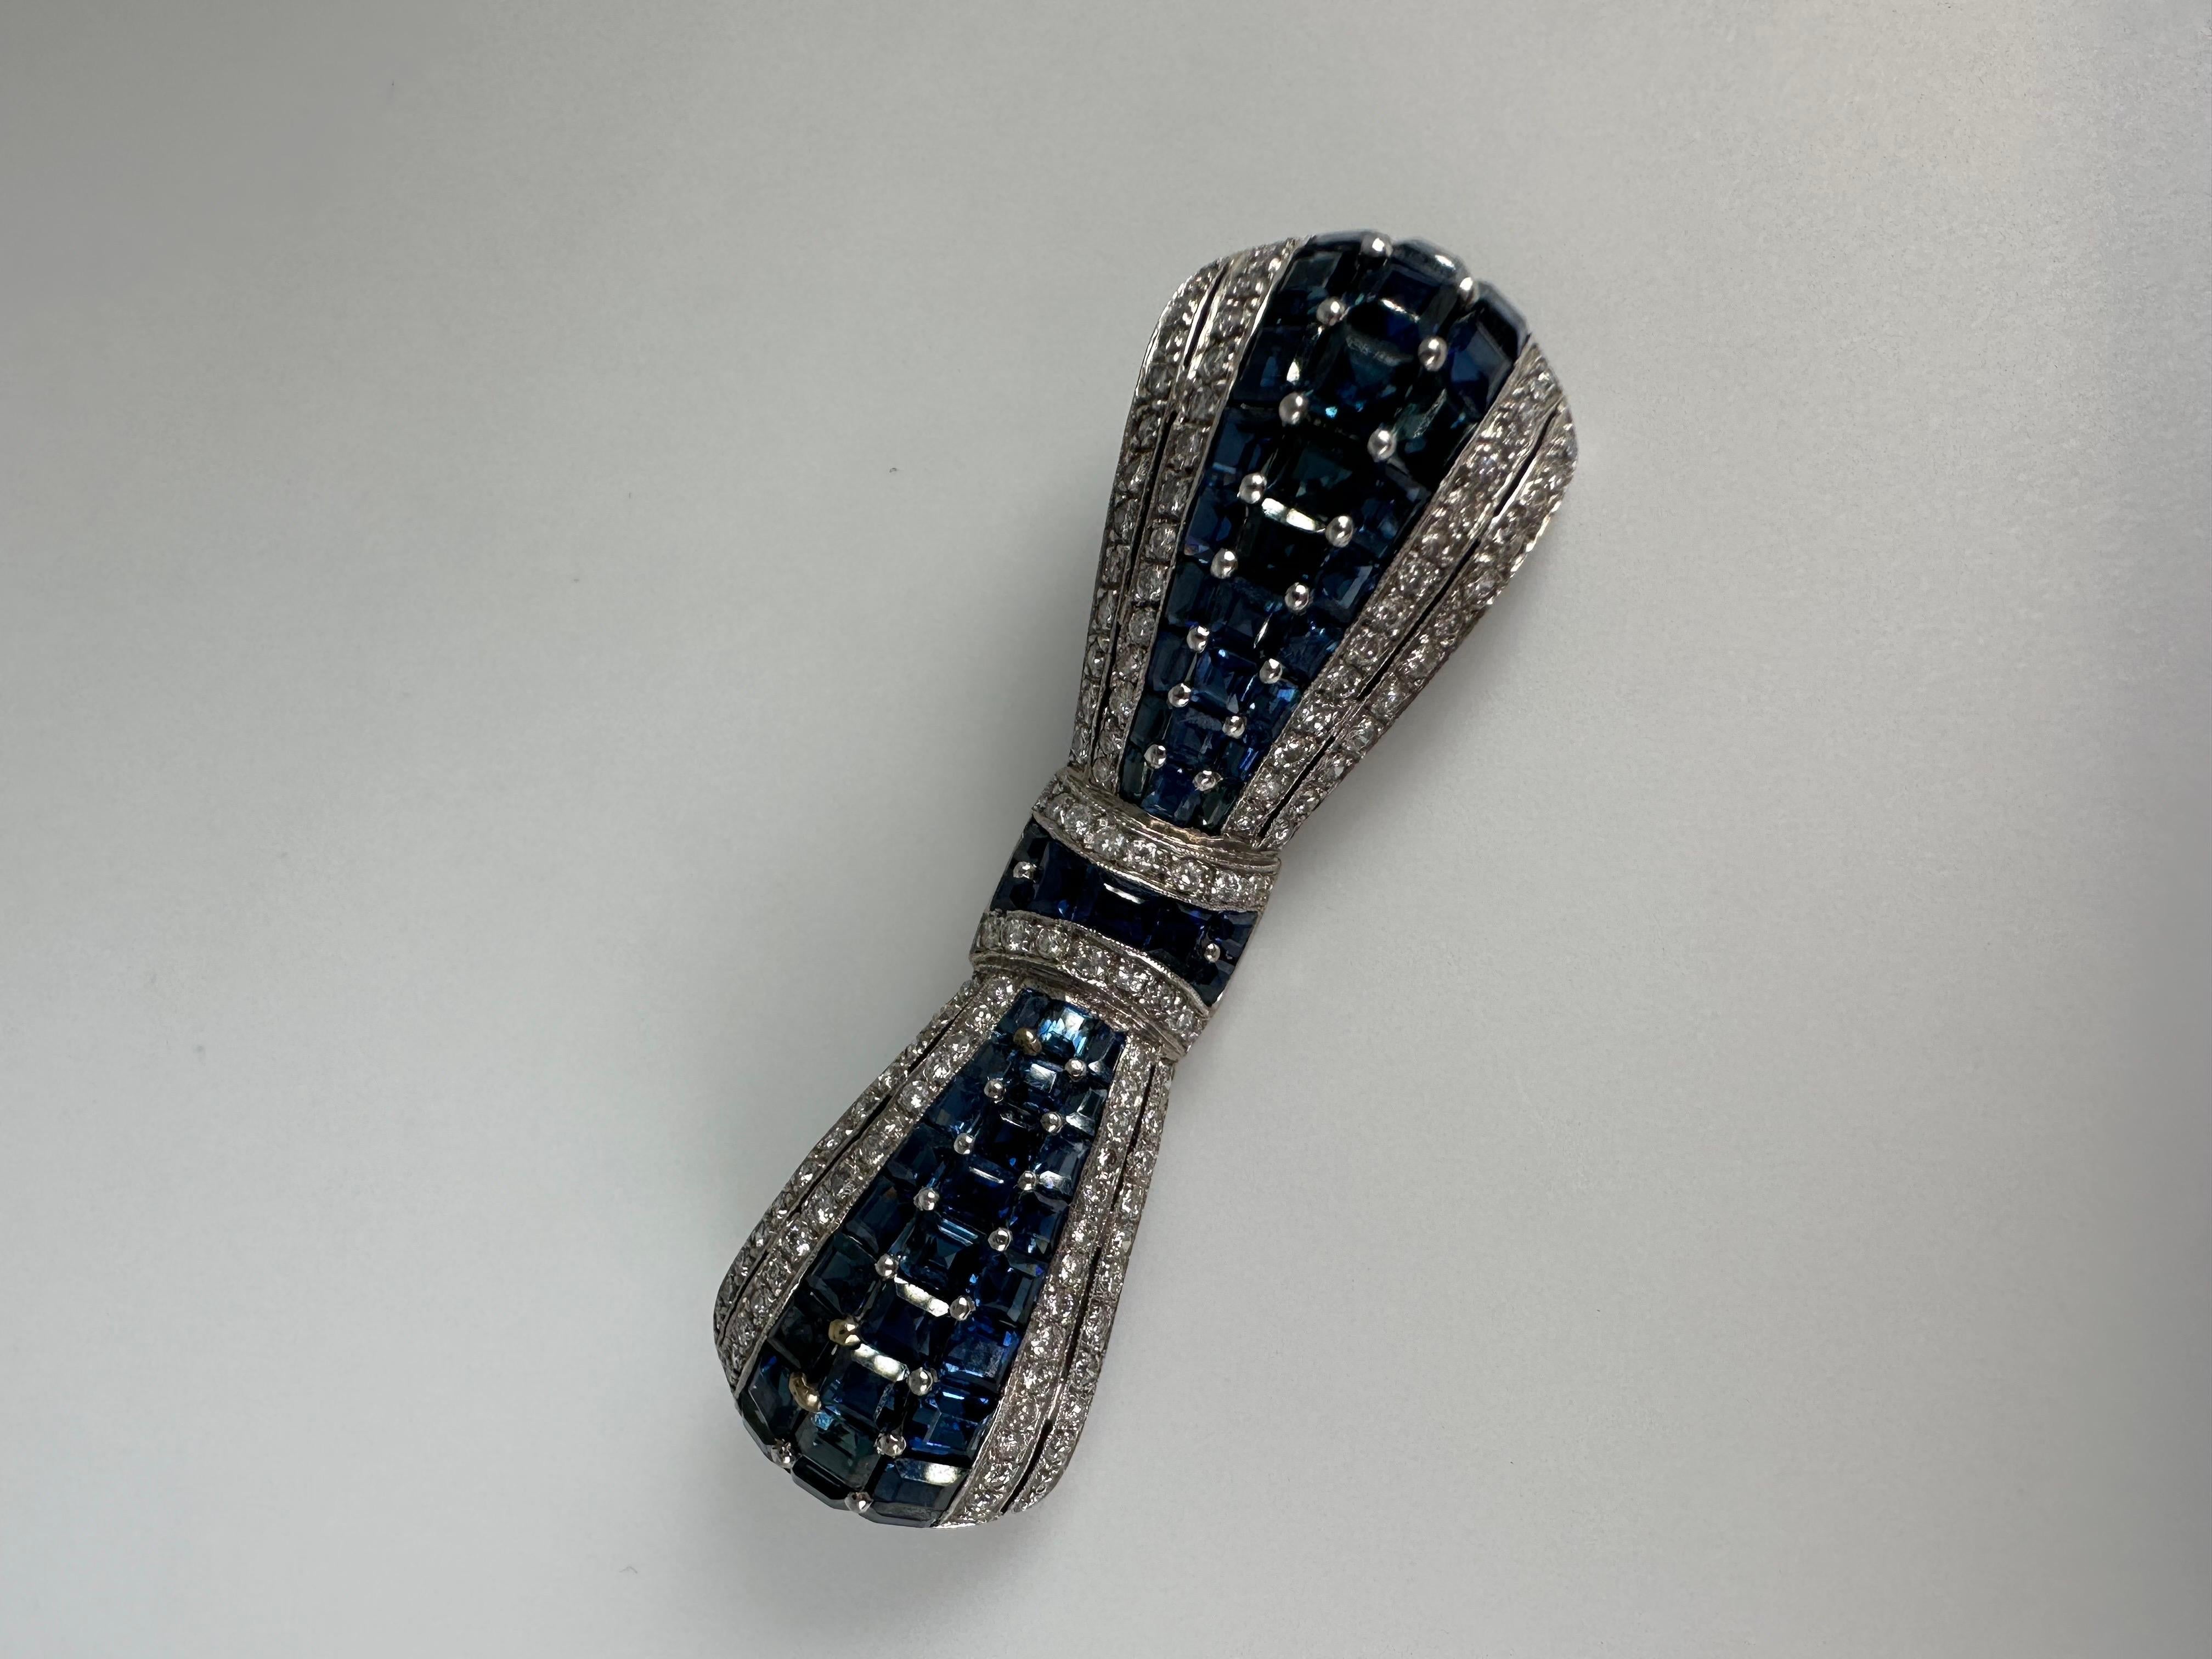 Unique hand crafted sapphire and diamond brooch made in 18KT white gold with stunning royal blue sapphires and fine white diamonds. The brooch is made with 1 carat of diamonds and over 8 carats of sapphires. The total gram weight is 10.18 grams. The